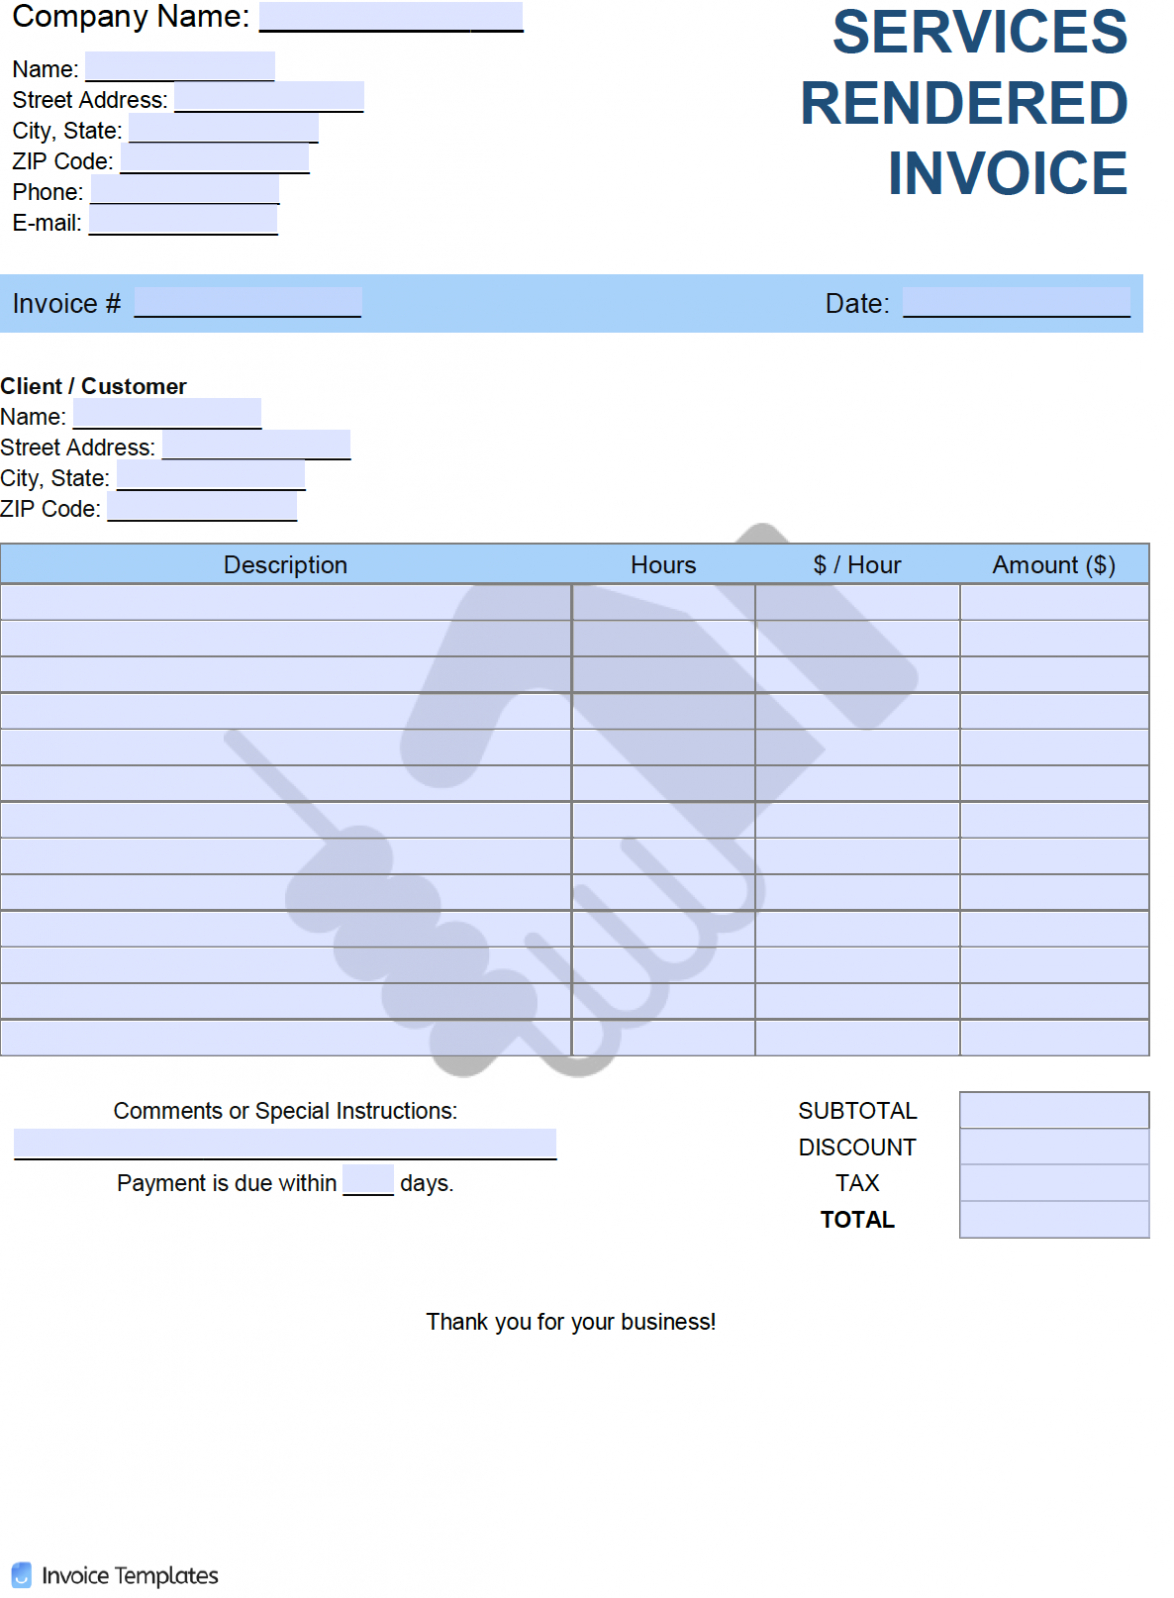 Free Services Rendered Invoice Template | Pdf | Word | Excel for Template Of Invoice For Services Rendered